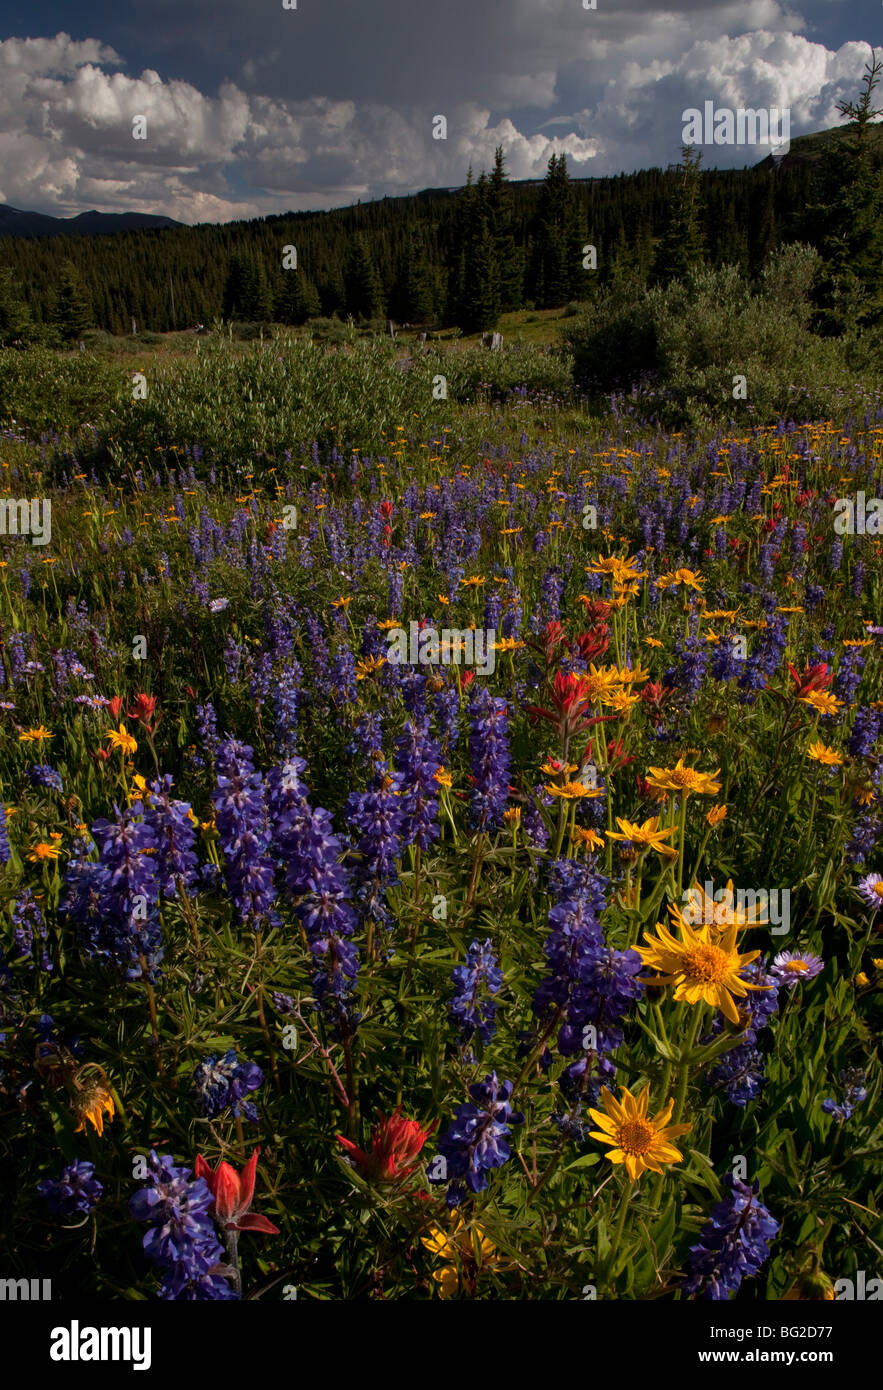 Spectacular early summer flowers, including arnica, lupin, paintbrush etc, on Shrine Pass near Vail, rockies Stock Photo